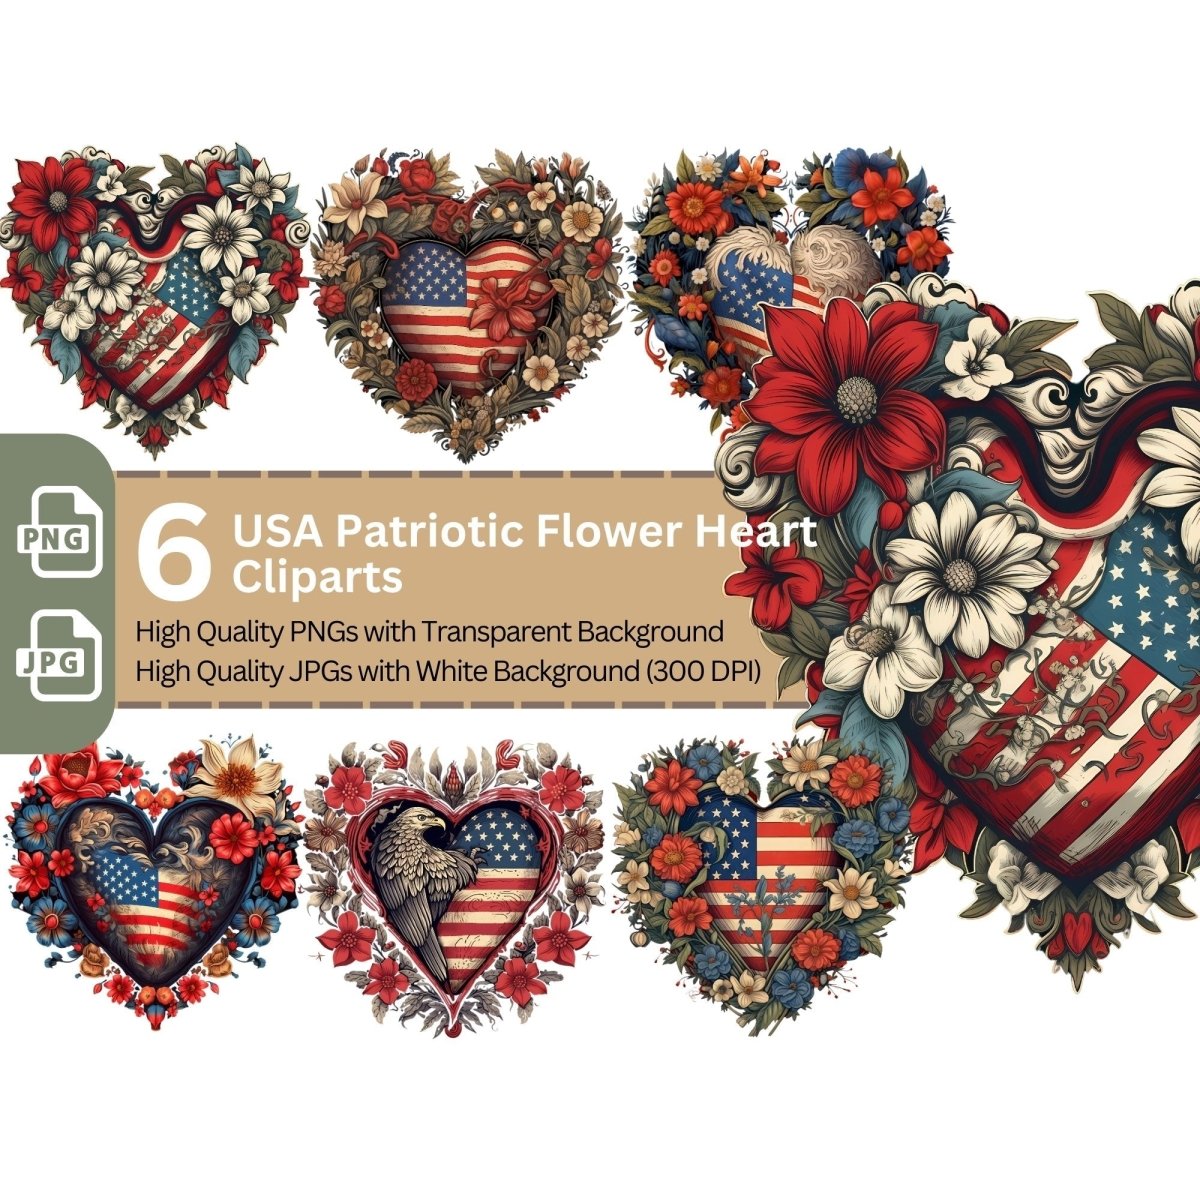 USA Patriotic Flower Heart 6+6 PNG Clip Art Bundle 4th july - Everything Pixel